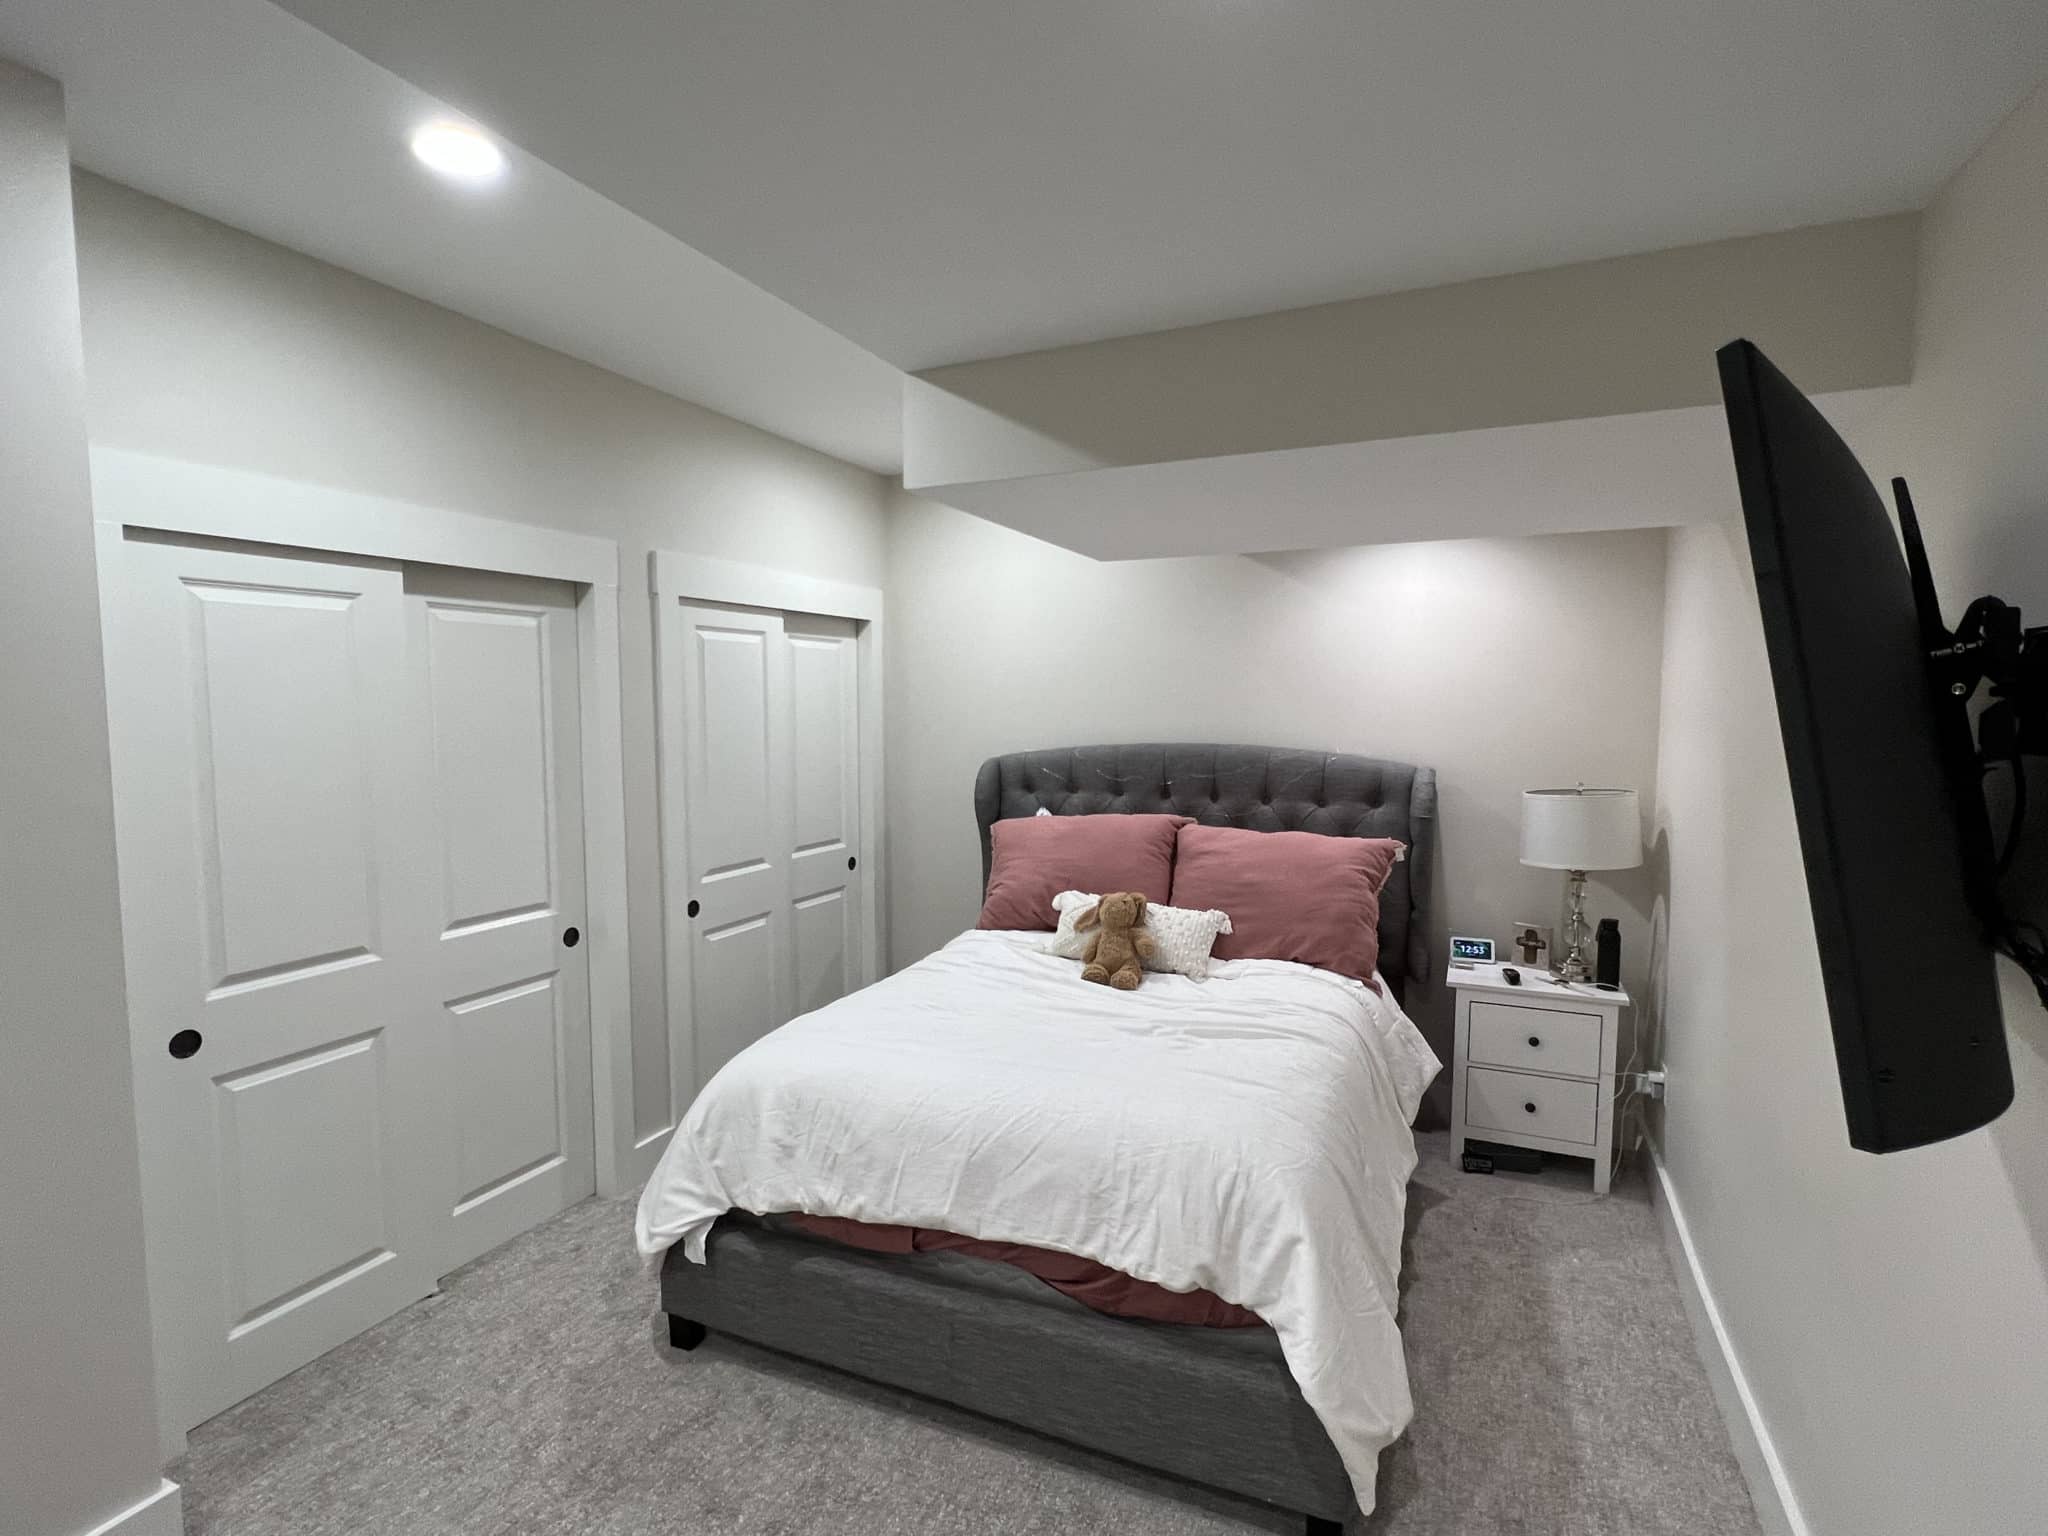 Bedroom Remodeling Services Springboro, OH